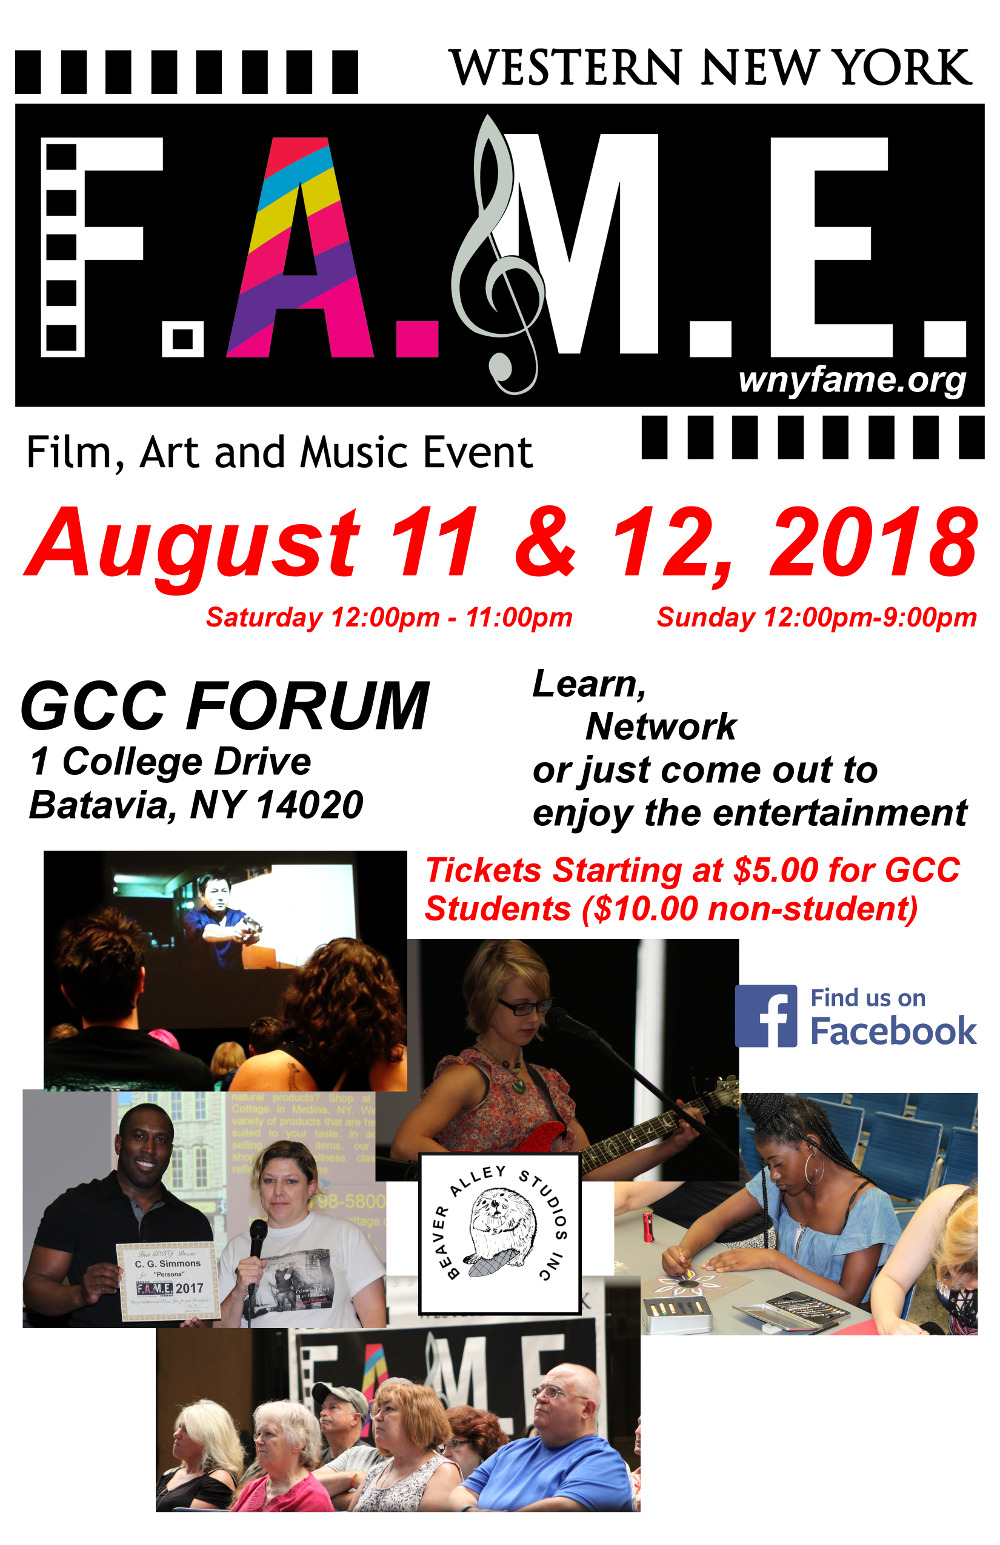 WNY FAME AUGUST 11 and 12, 2018